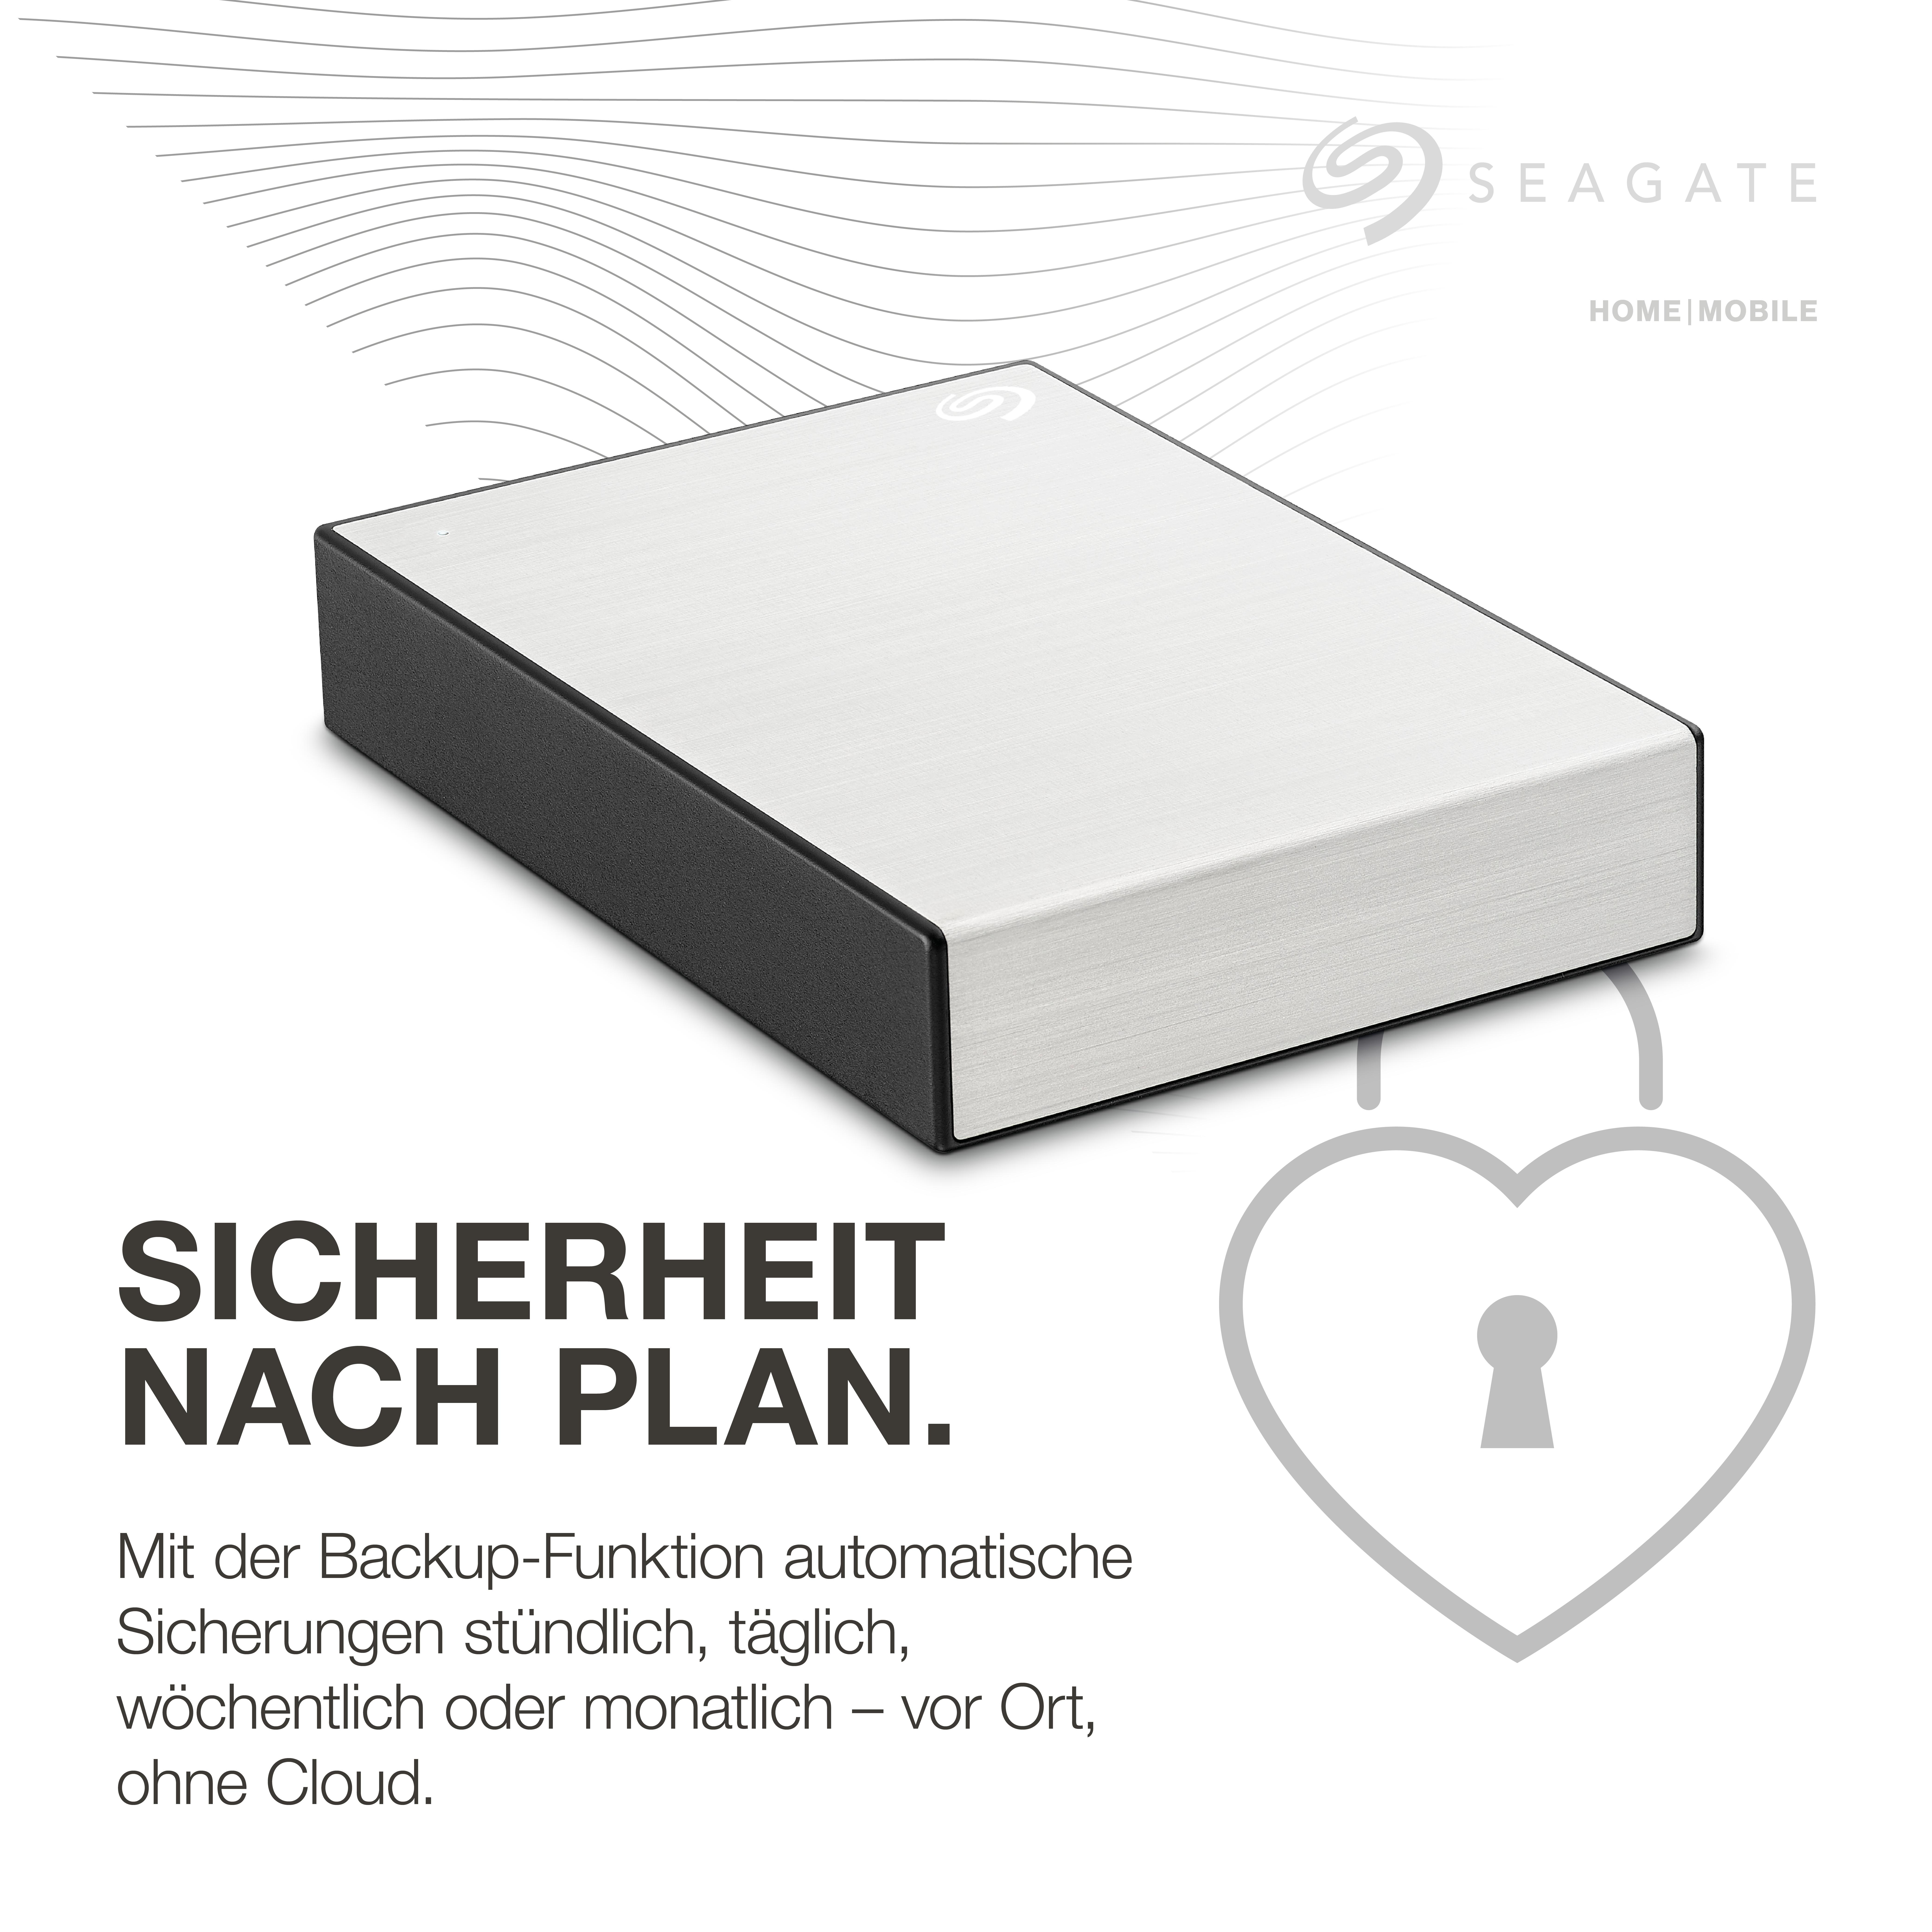 SEAGATE One Touch mobile HDD, 5 extern, 2,5 Zoll, TB Silber Festplatte